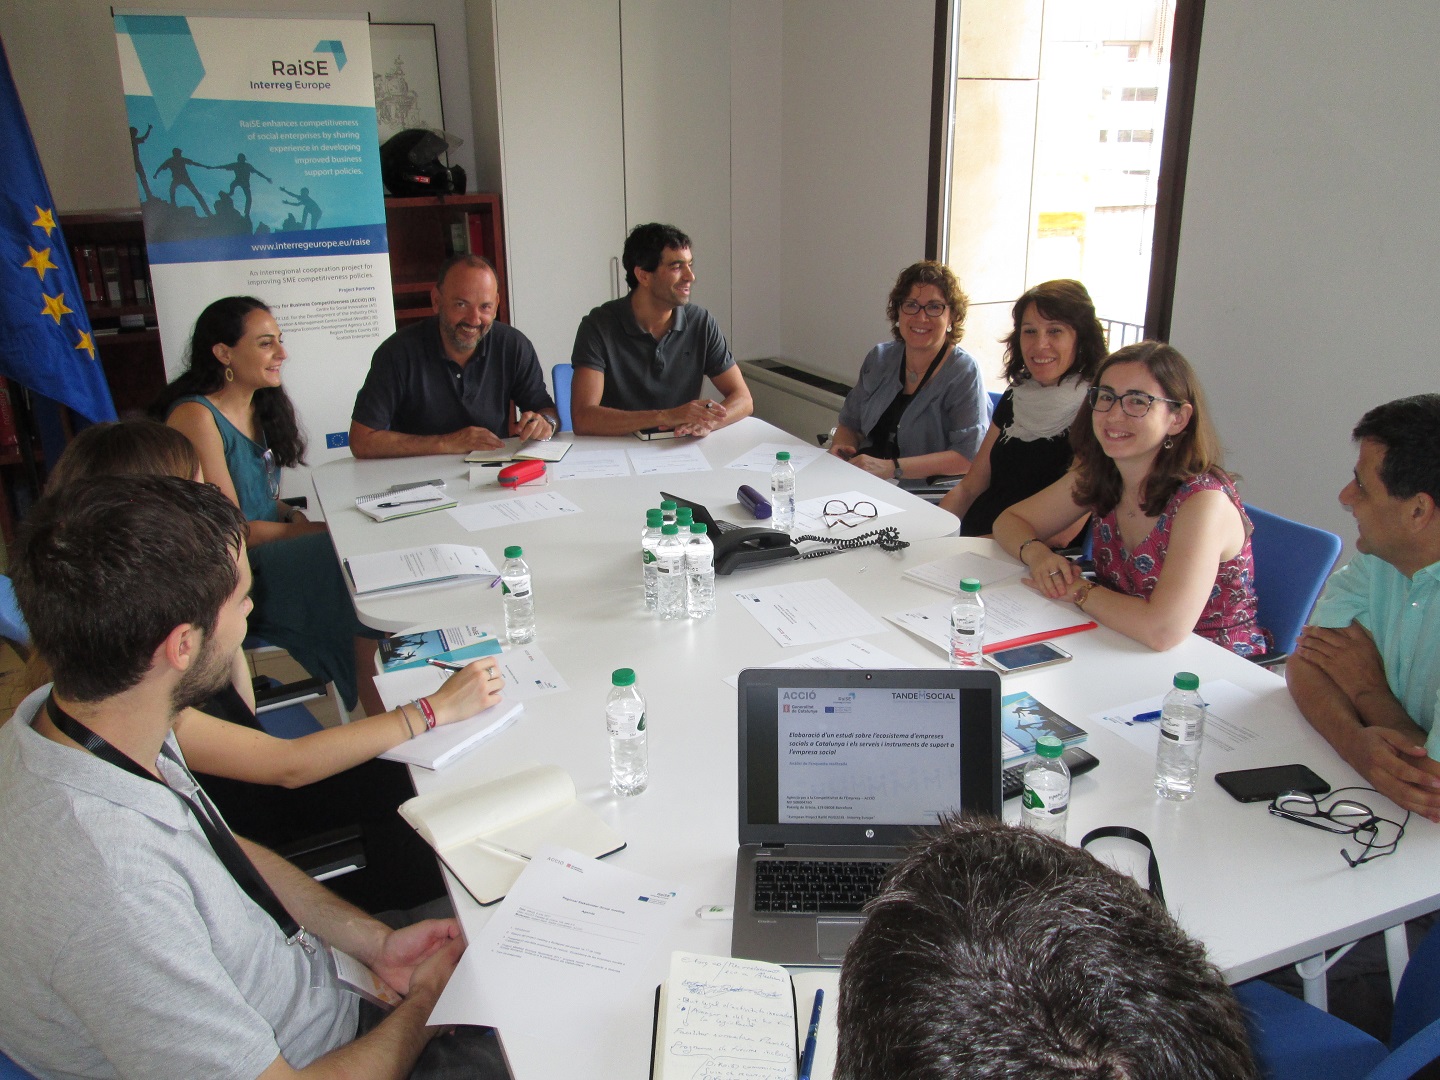 Second stakeholder group meeting in Catalonia